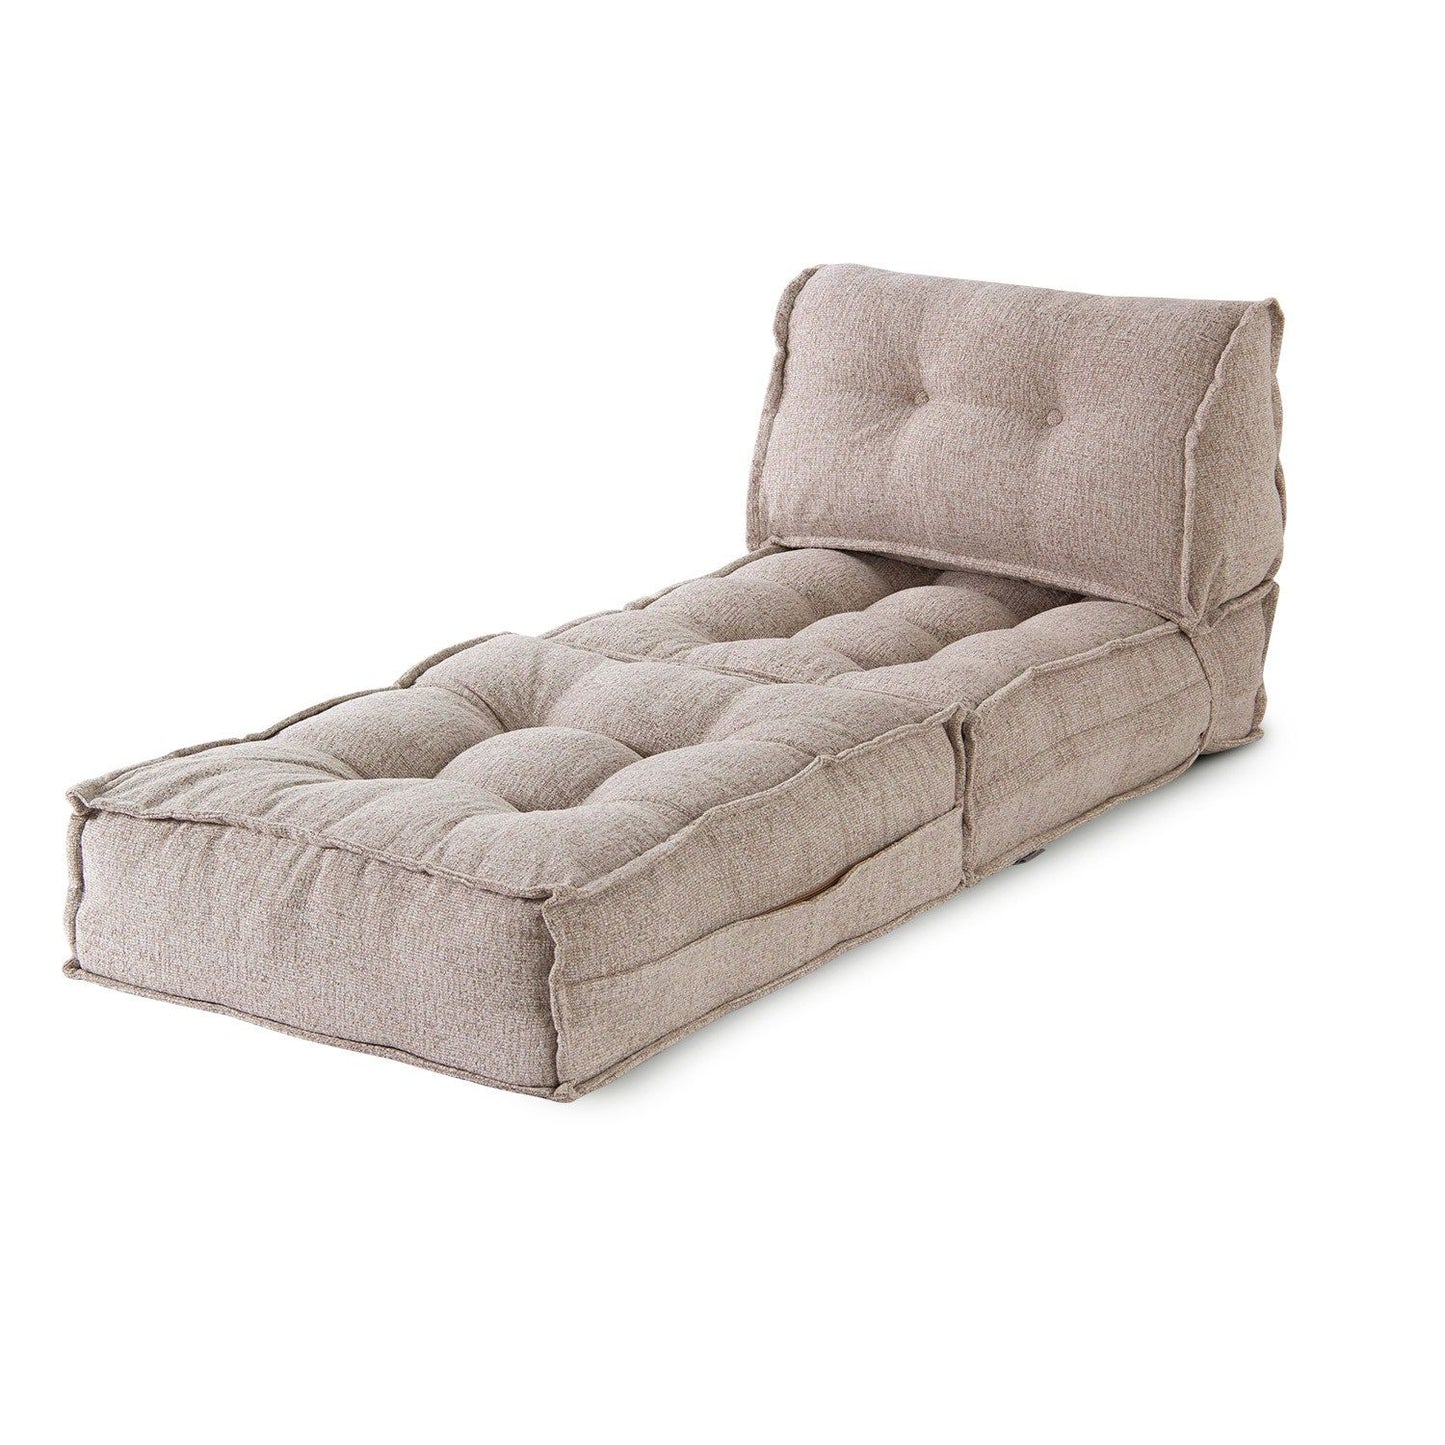 Mocca - Light Brown - 1-Seat Sofa-Bed